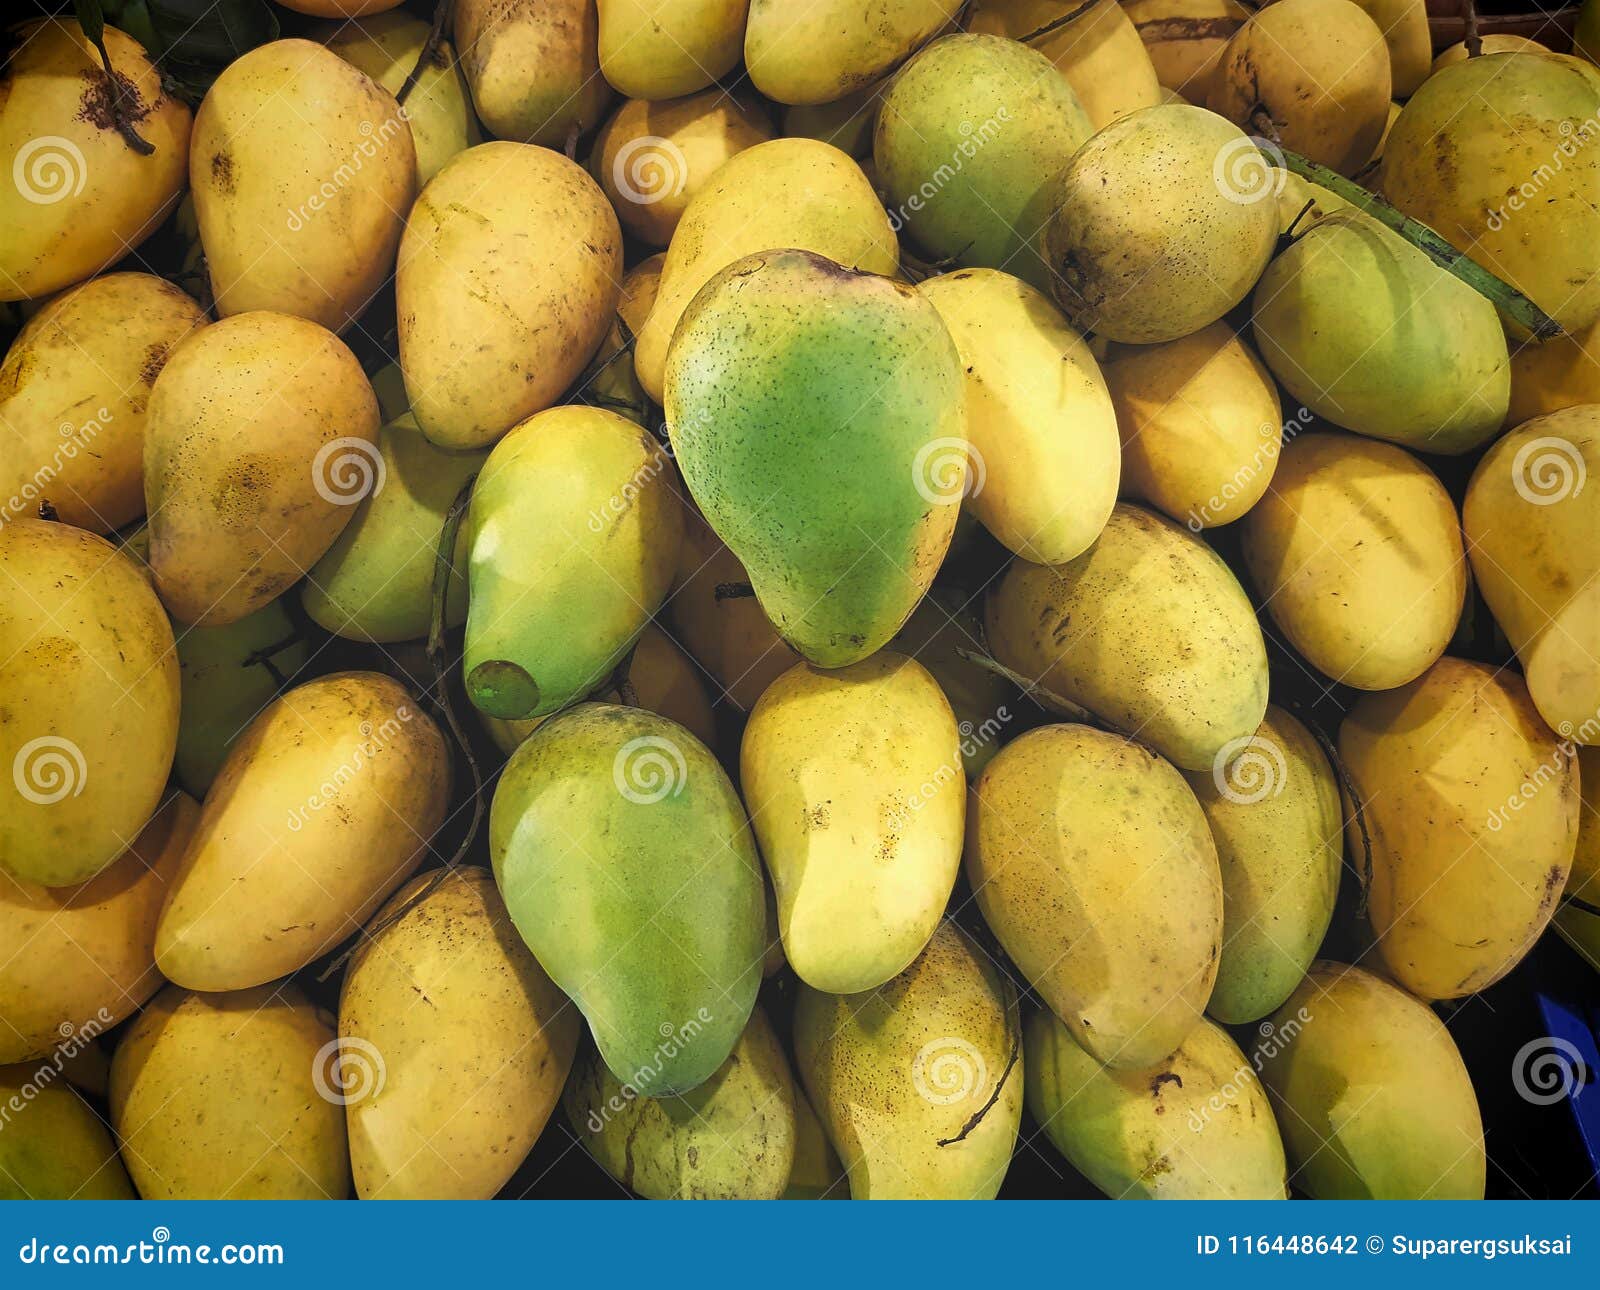 Pile of Ripe Sweet Yellow Mangoes Stock Photo - Image of agriculture ...